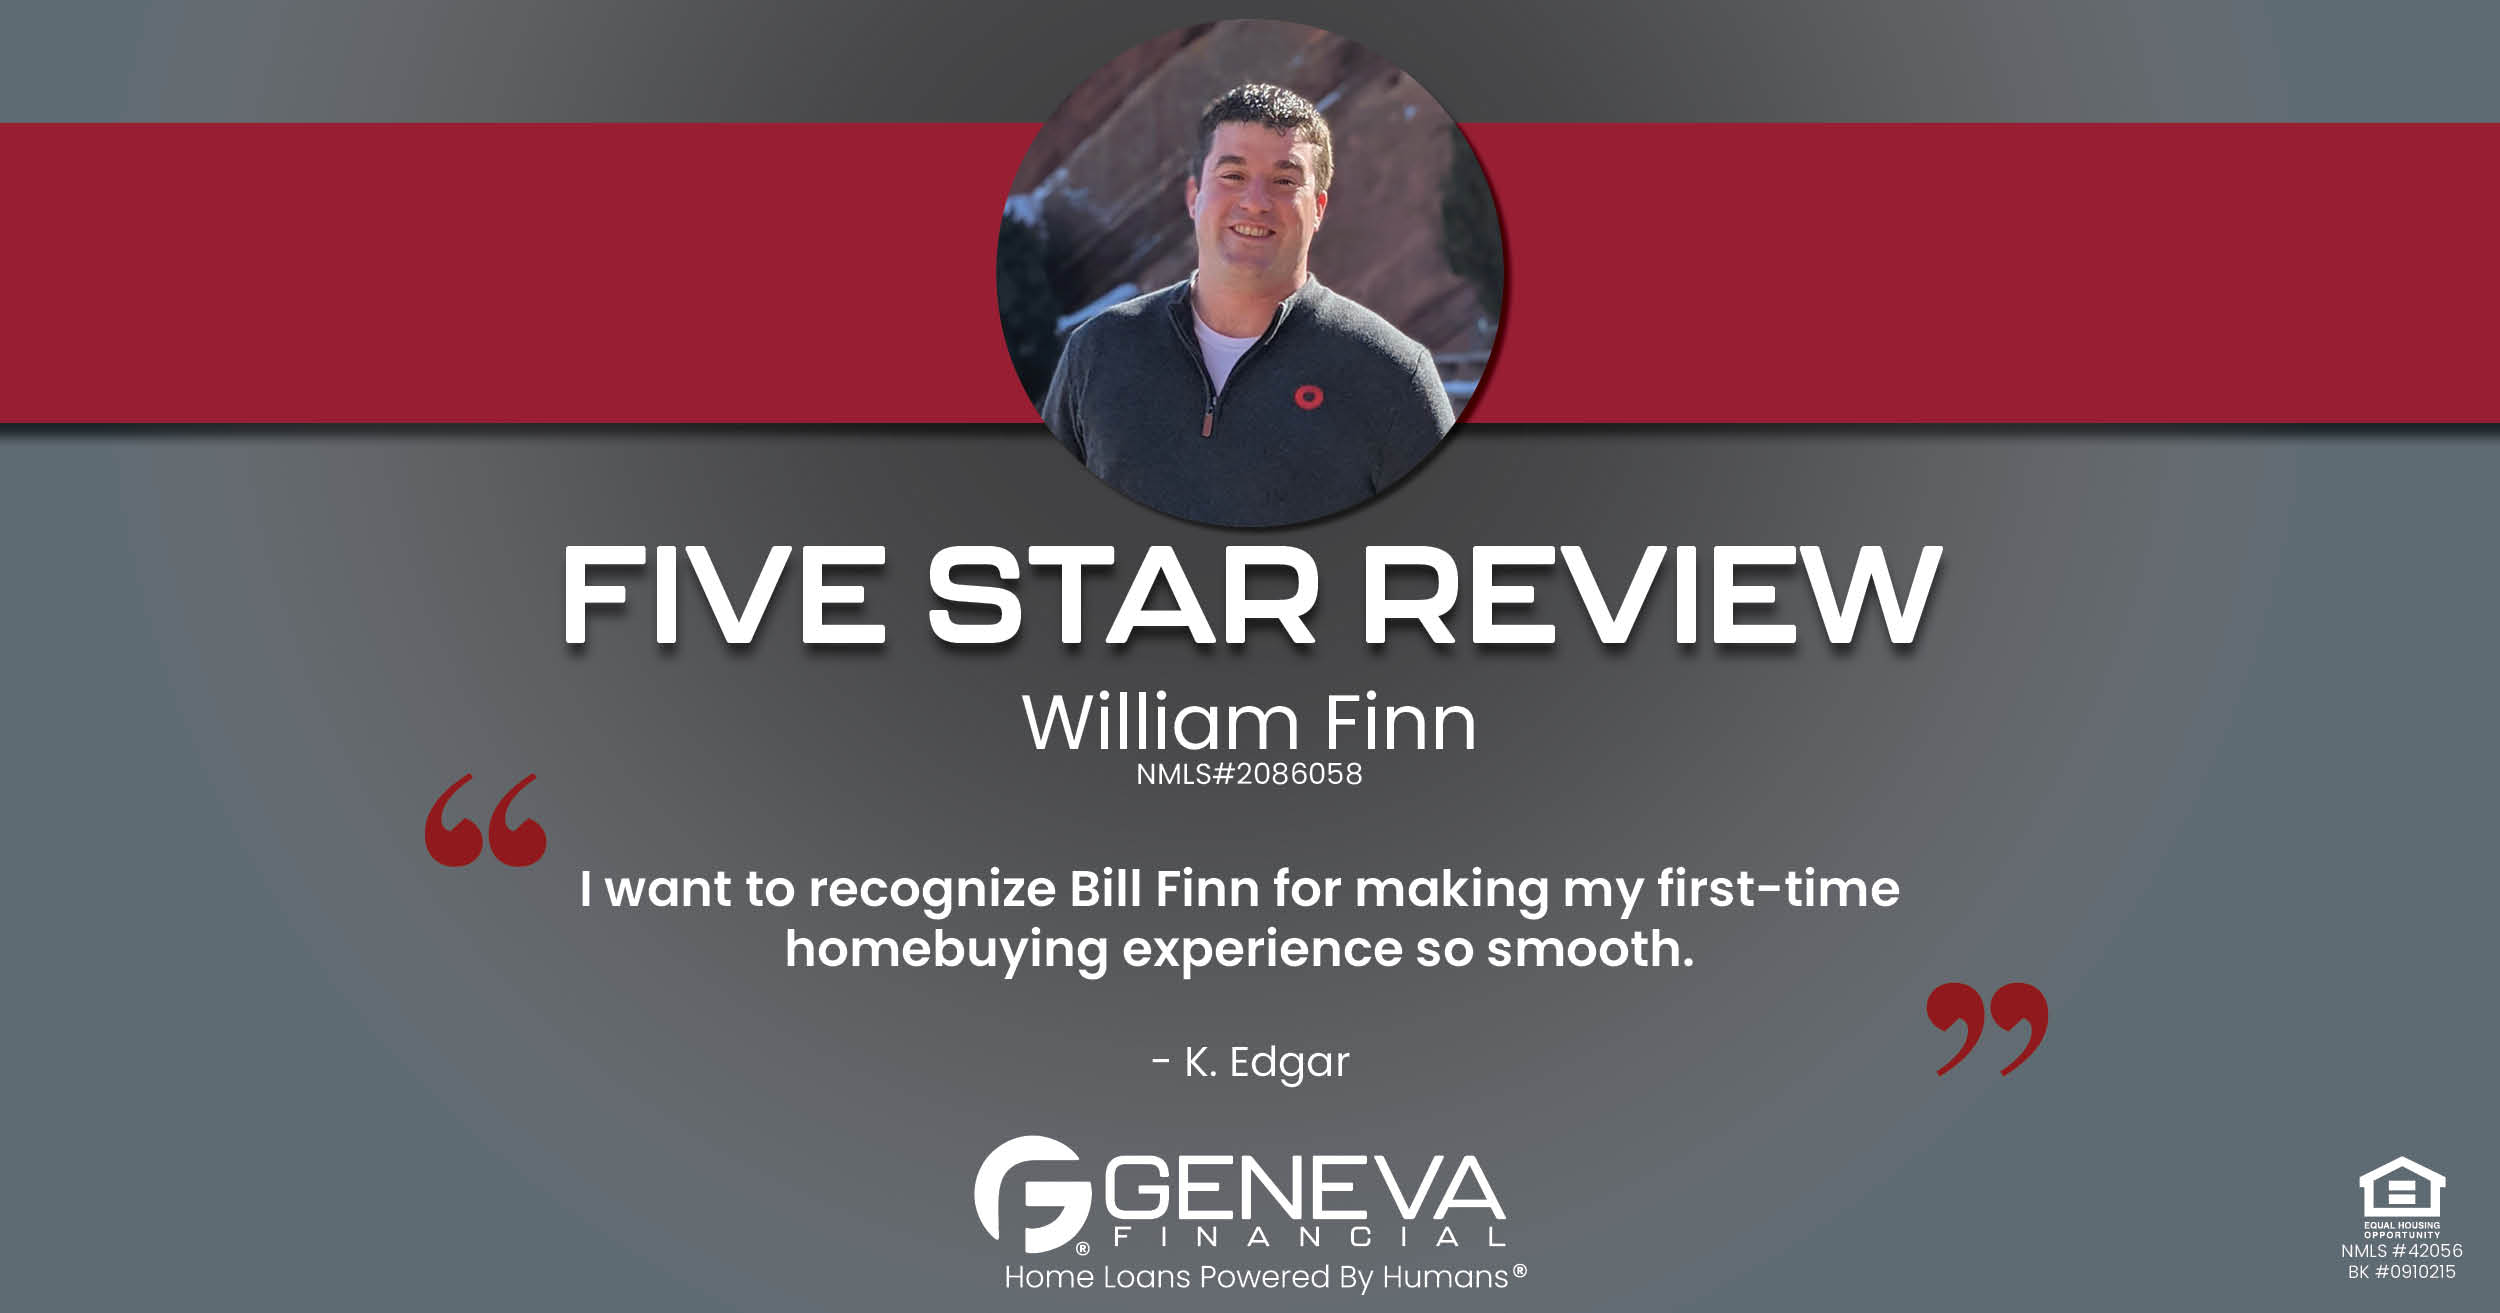 5 Star Review for William Finn, Licensed Mortgage Loan Officer with Geneva Financial, Temecula, CA – Home Loans Powered by Humans®.